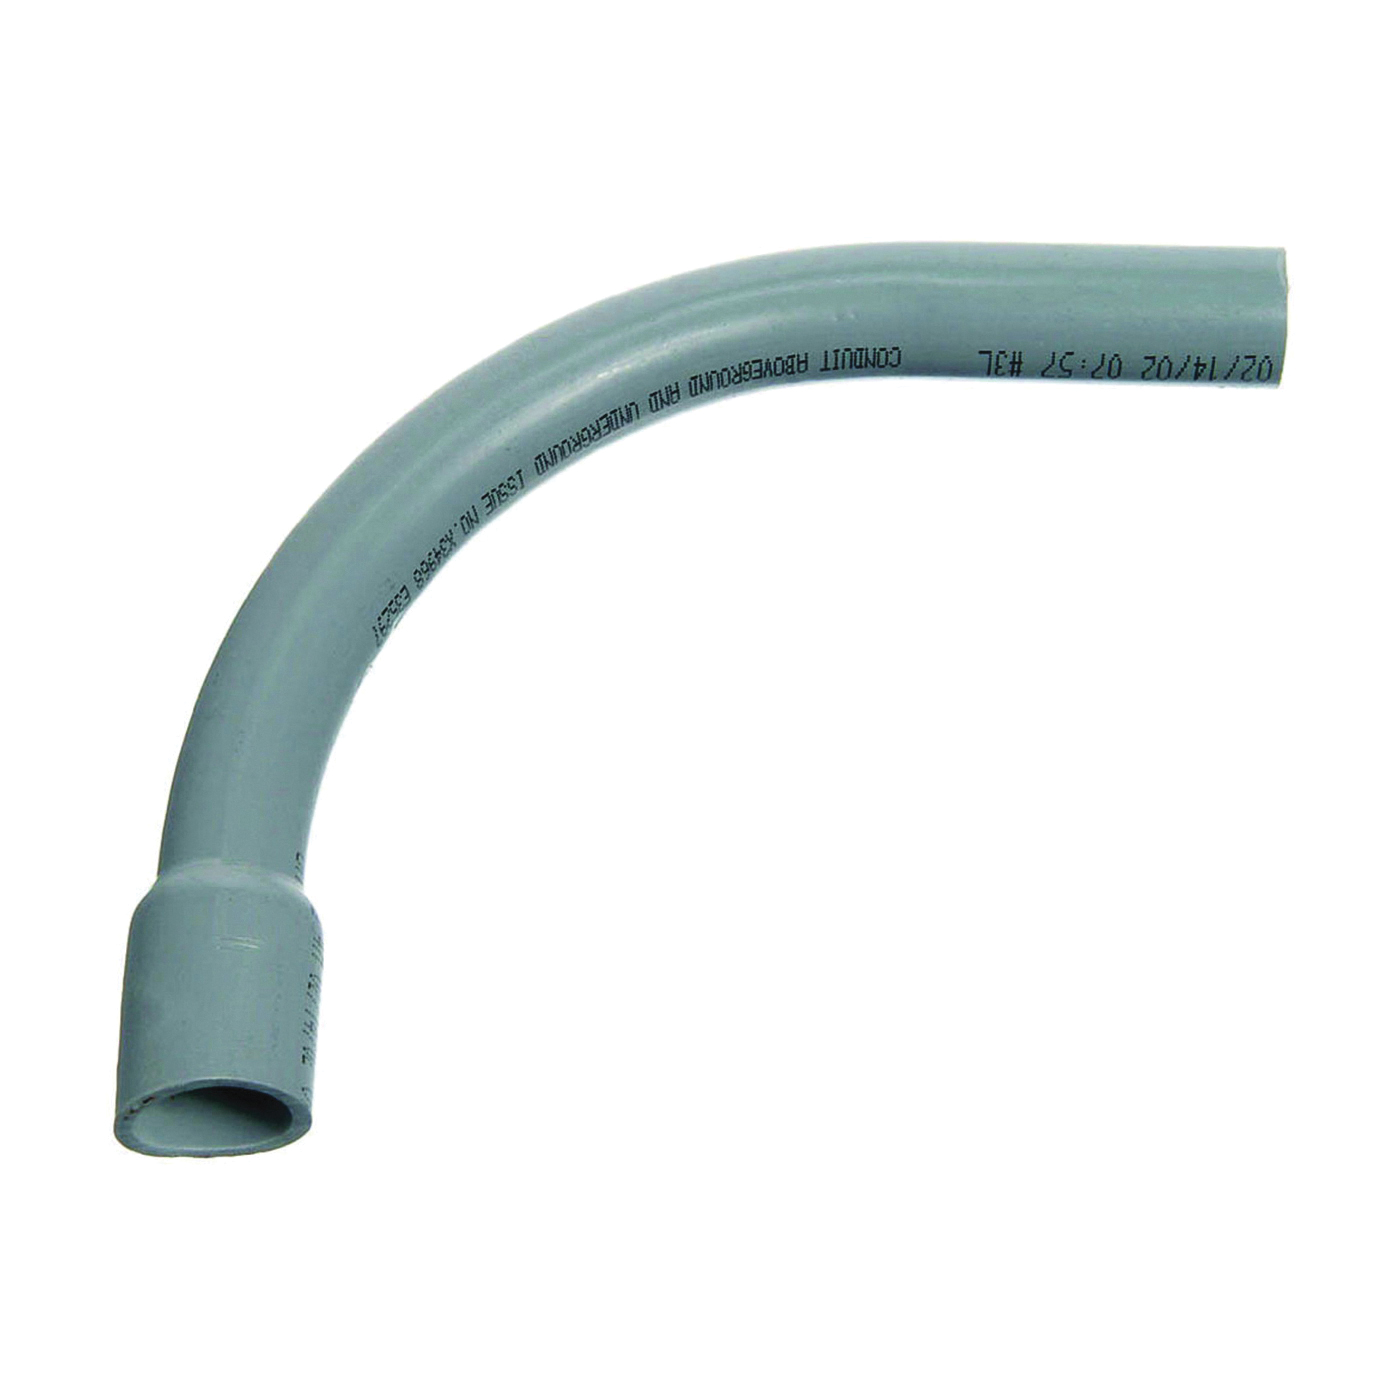 Carlon UA9AKB-CAR Elbow, 2-1/2 in Trade Size, 90 deg Angle, SCH 40 Schedule Rating, PVC, Bell End, Gray